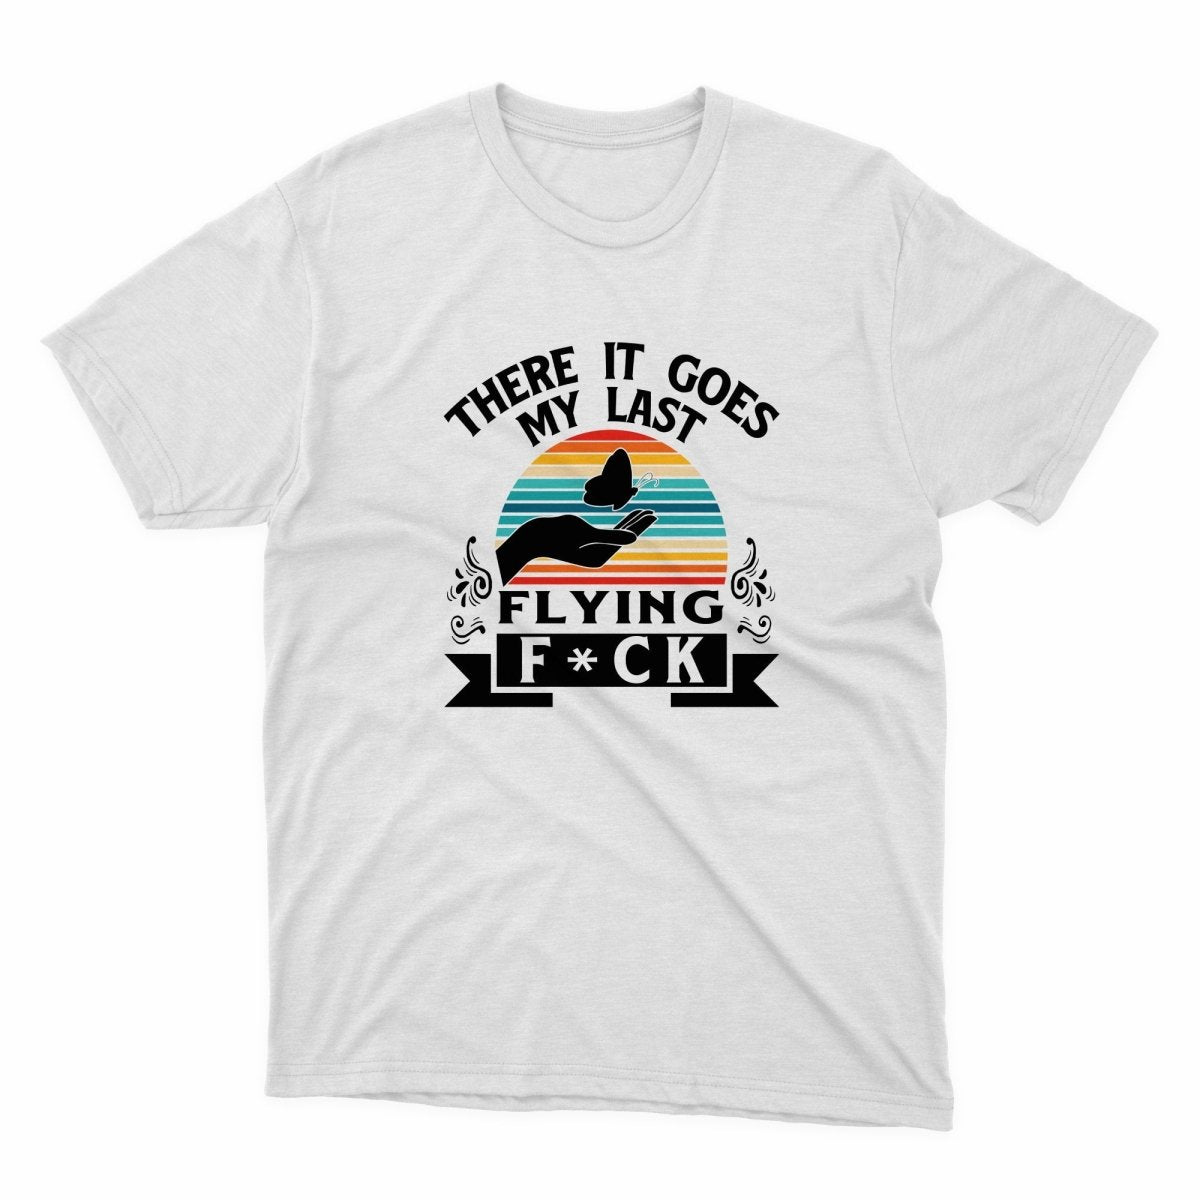 There It Goes My Last Flying Fuck Shirt - stickerbullThere It Goes My Last Flying Fuck ShirtShirtsPrintifystickerbull54813989172827252079WhiteSa white t - shirt with the words, there it goes my last flying f